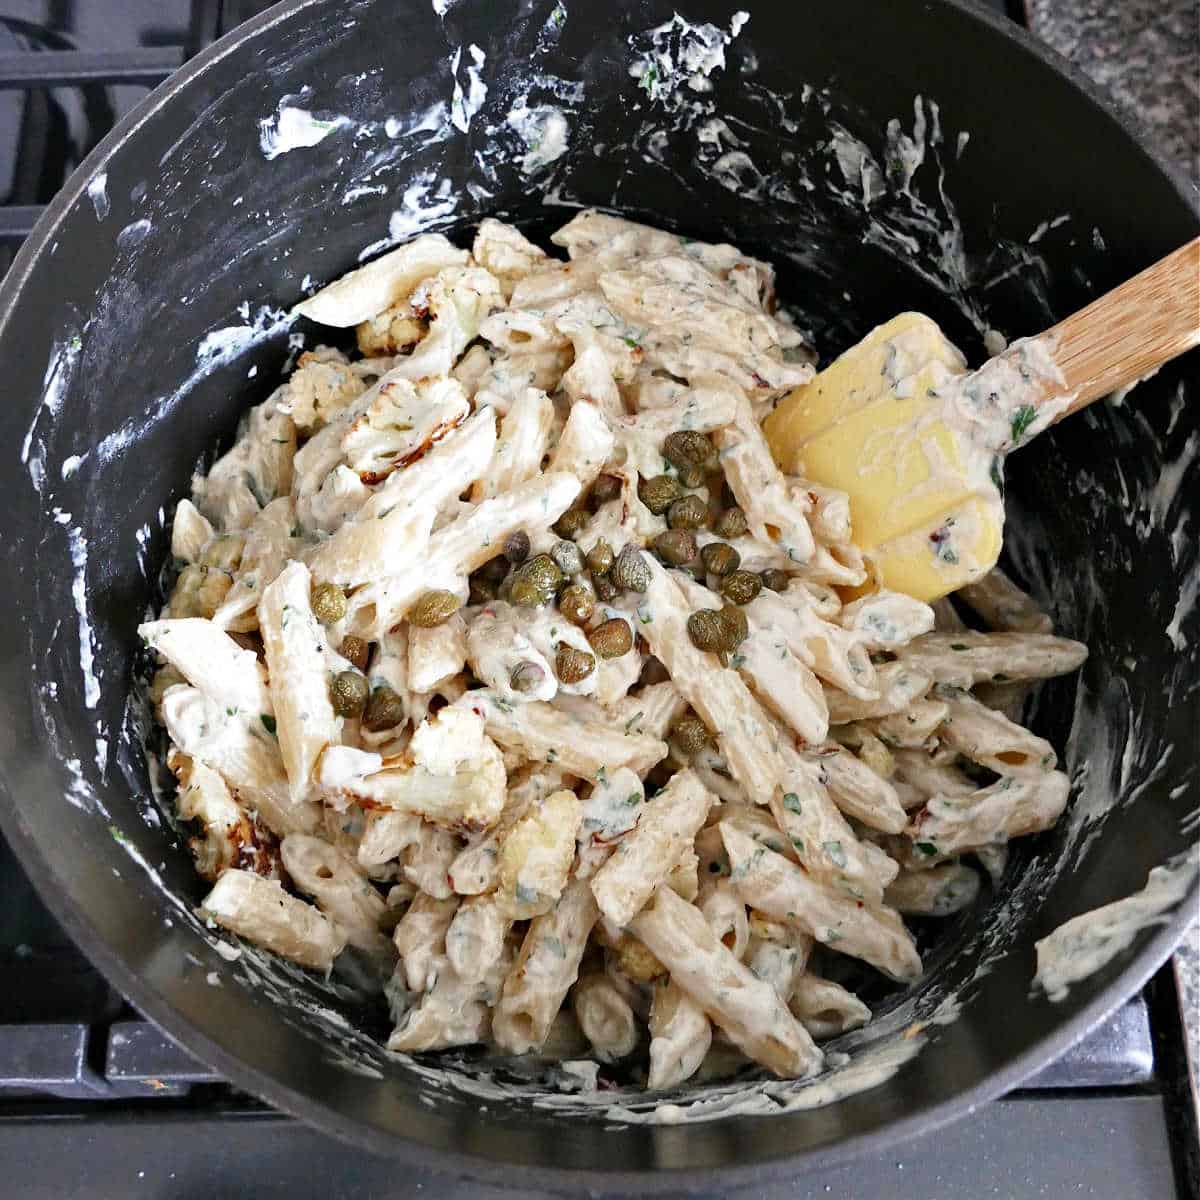 tahini pasta being mixed with cauliflower and capers in a pot